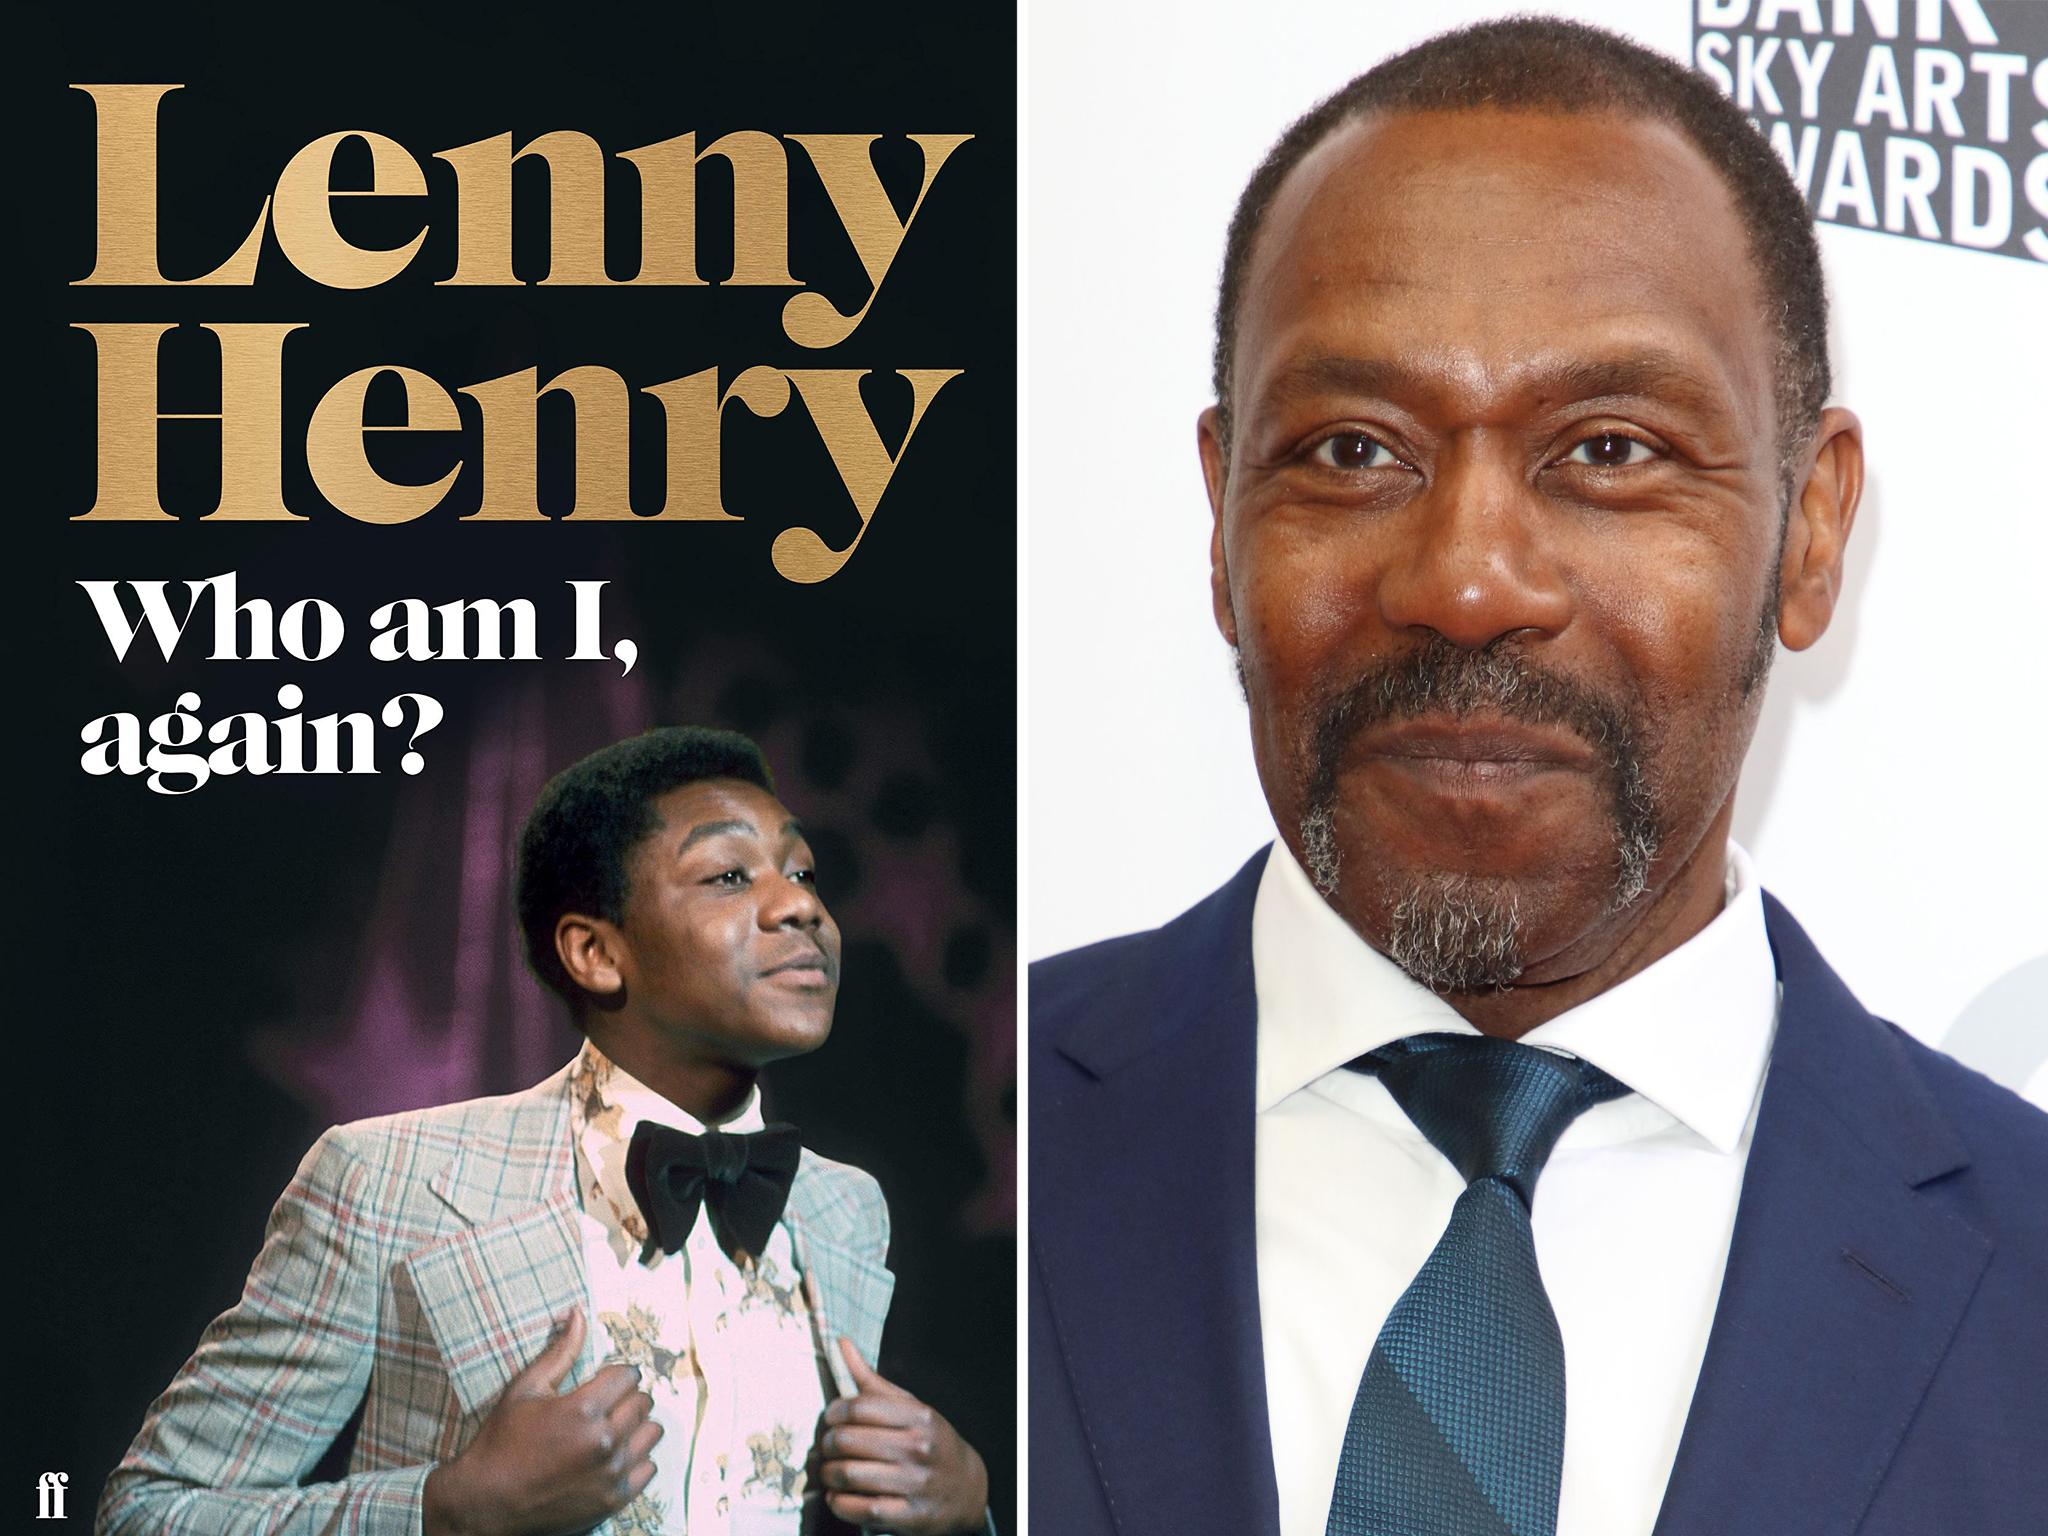 The memoir, which recounts Lenny Henry’s life up to around 1980, is reflective and depressing